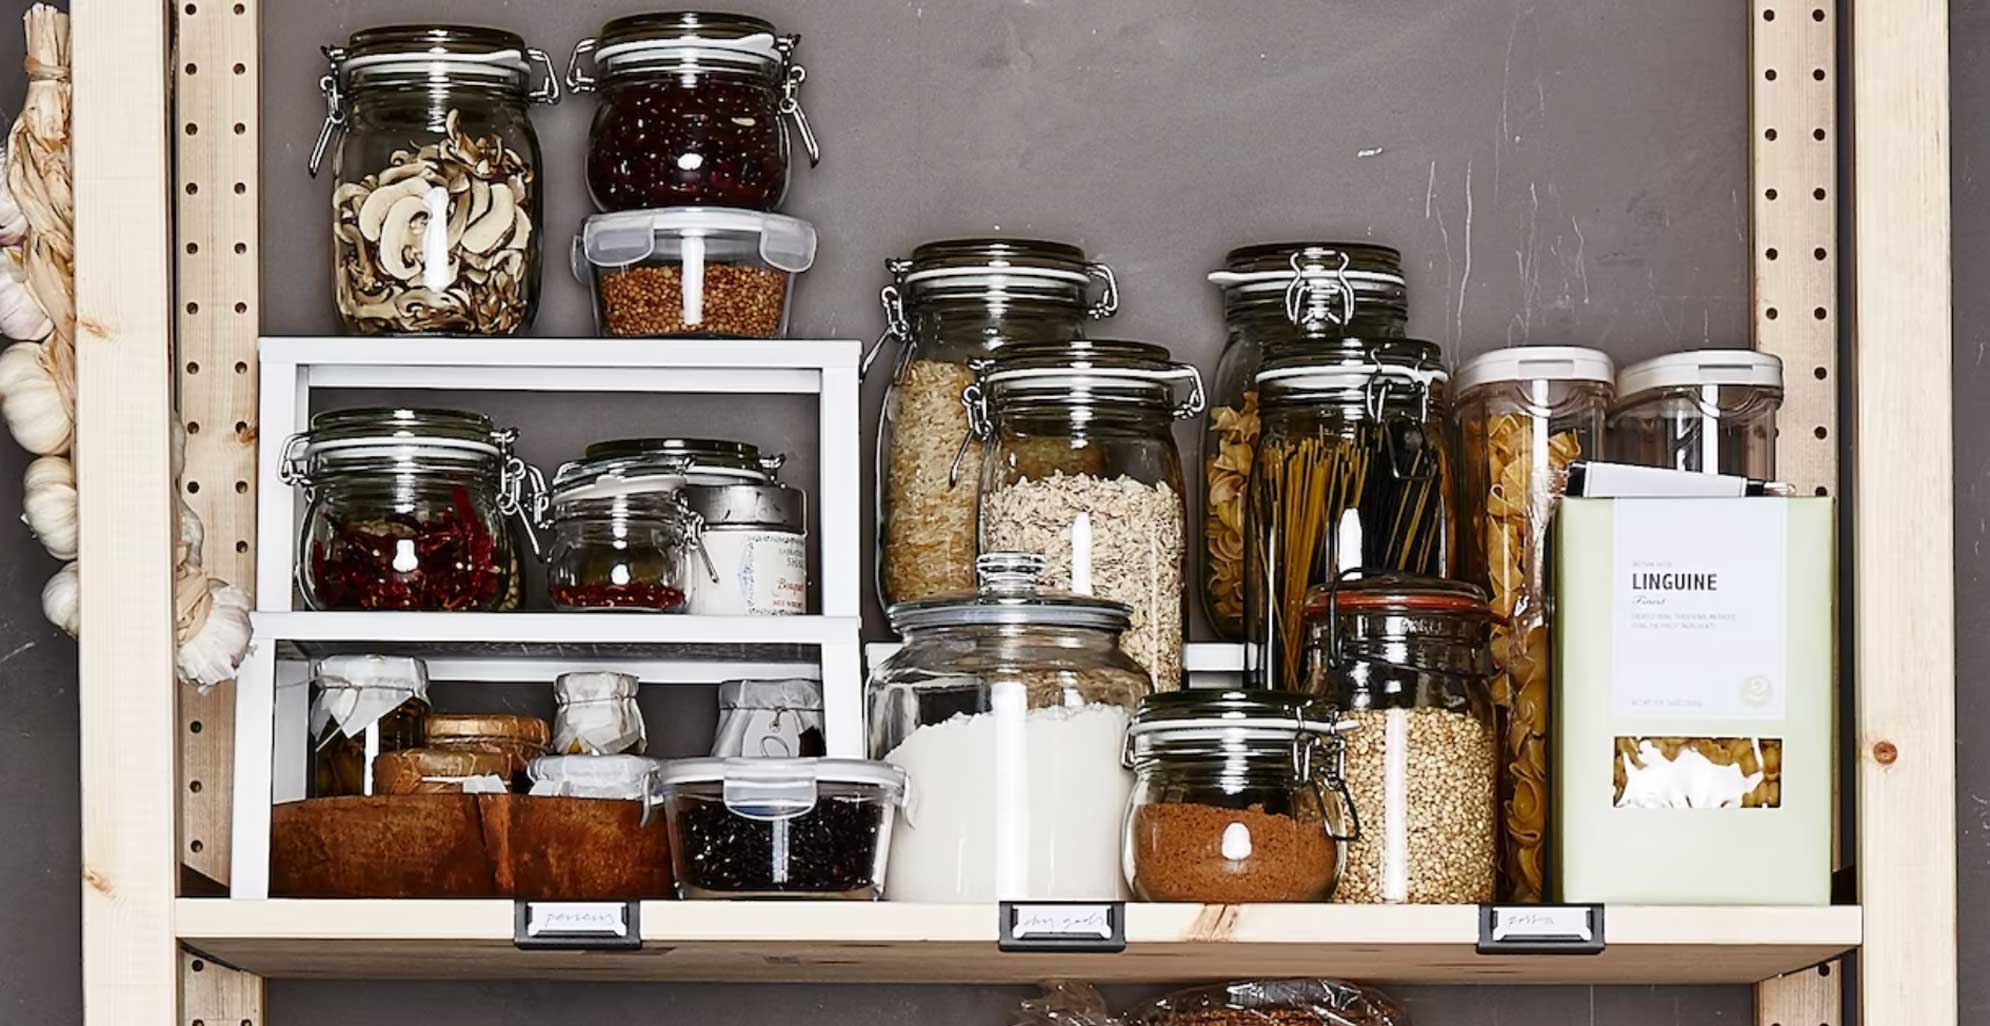 Inside an organized pantry with shelf stackers to show how to maximize space on the shelves